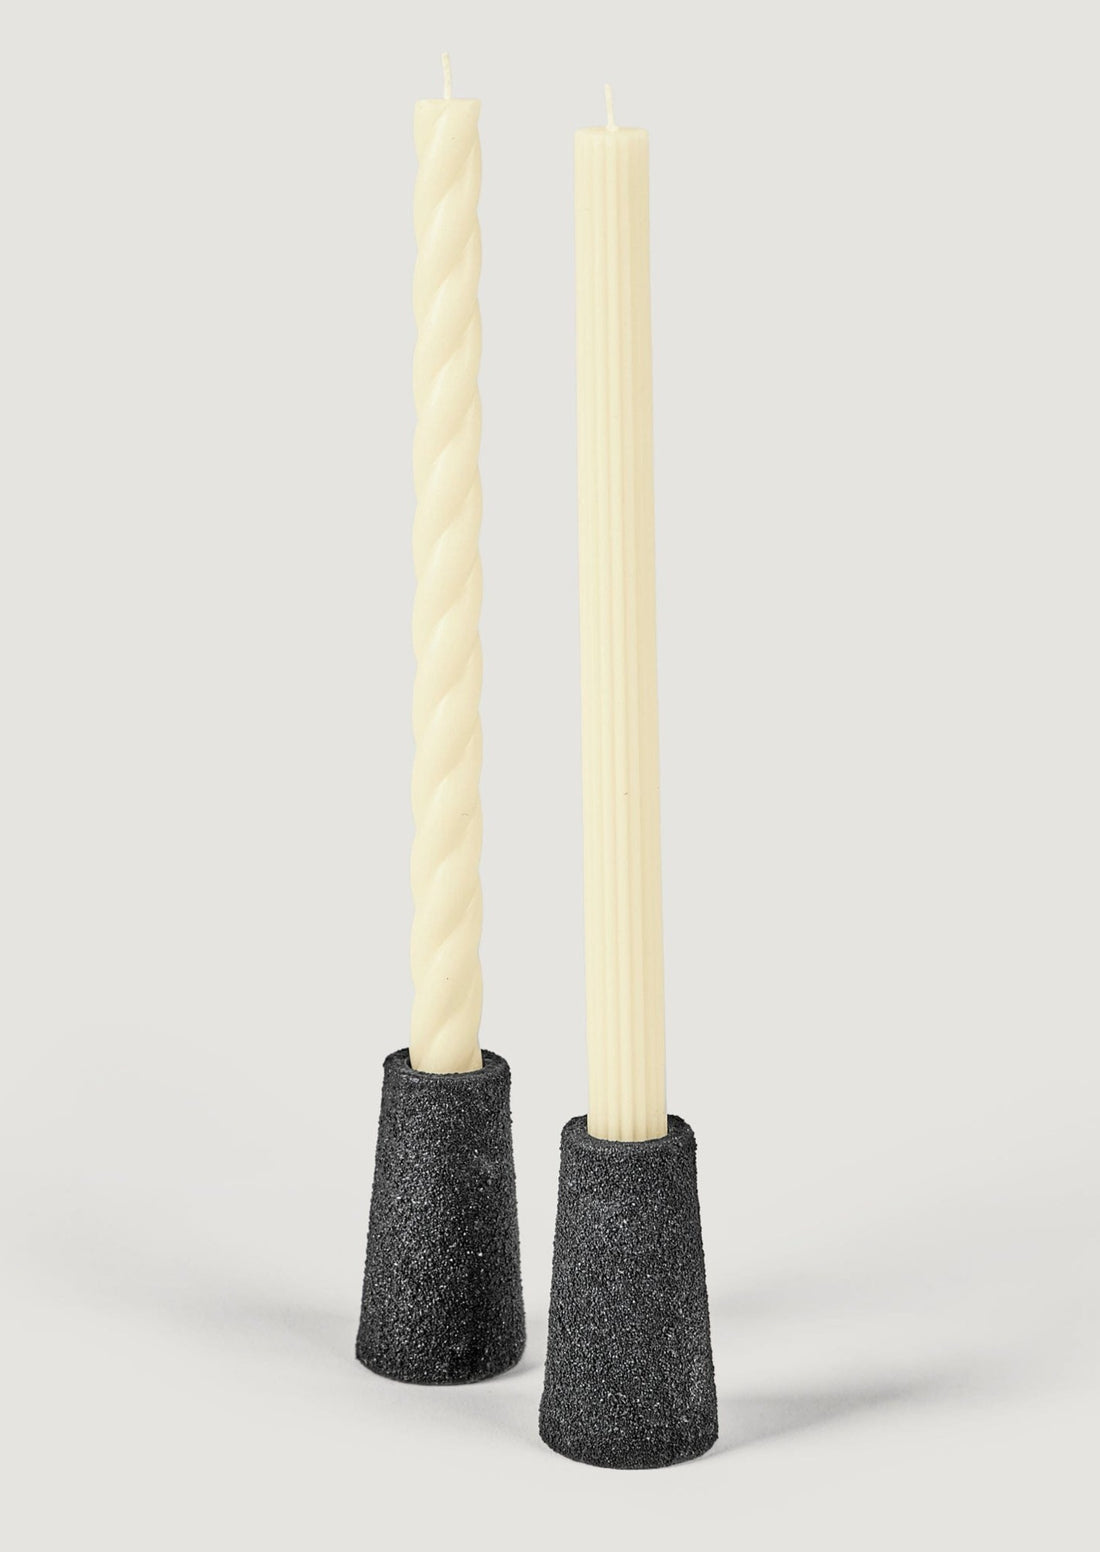 Black Pumice Taper Candle Holders Styled with Cream Candles at Afloral